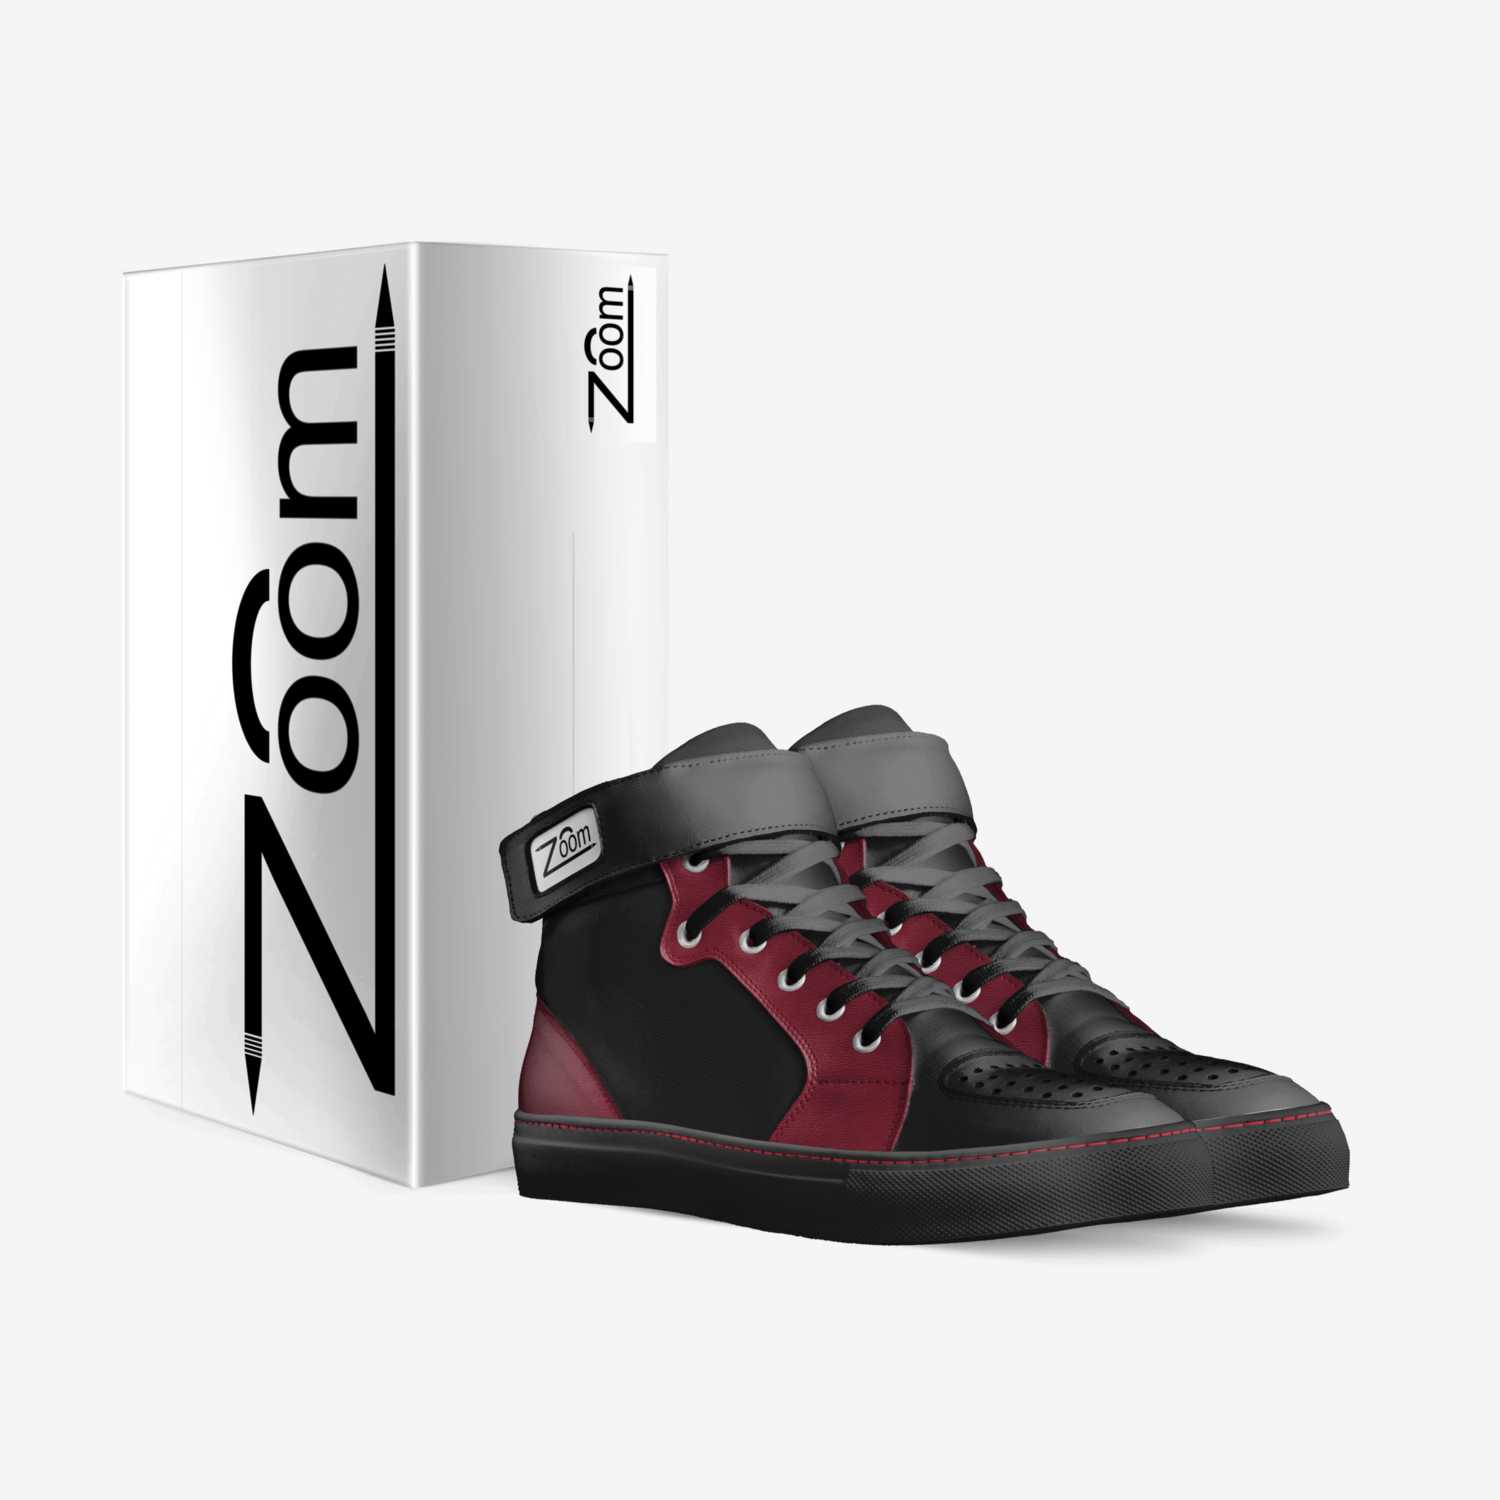 Zoom custom made in Italy shoes by Wilfred Austin | Box view